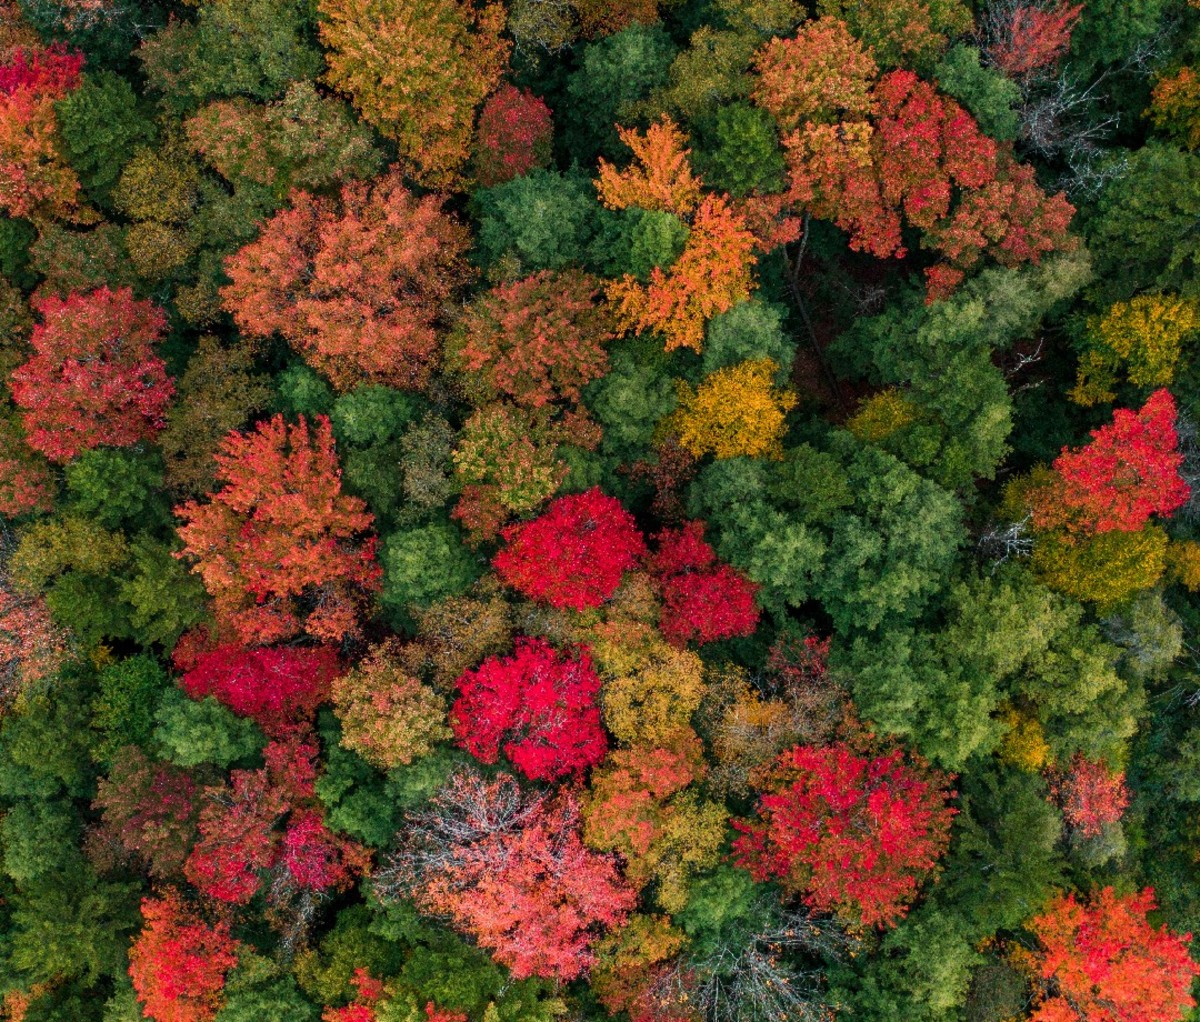 Overview of trees with fall foliage